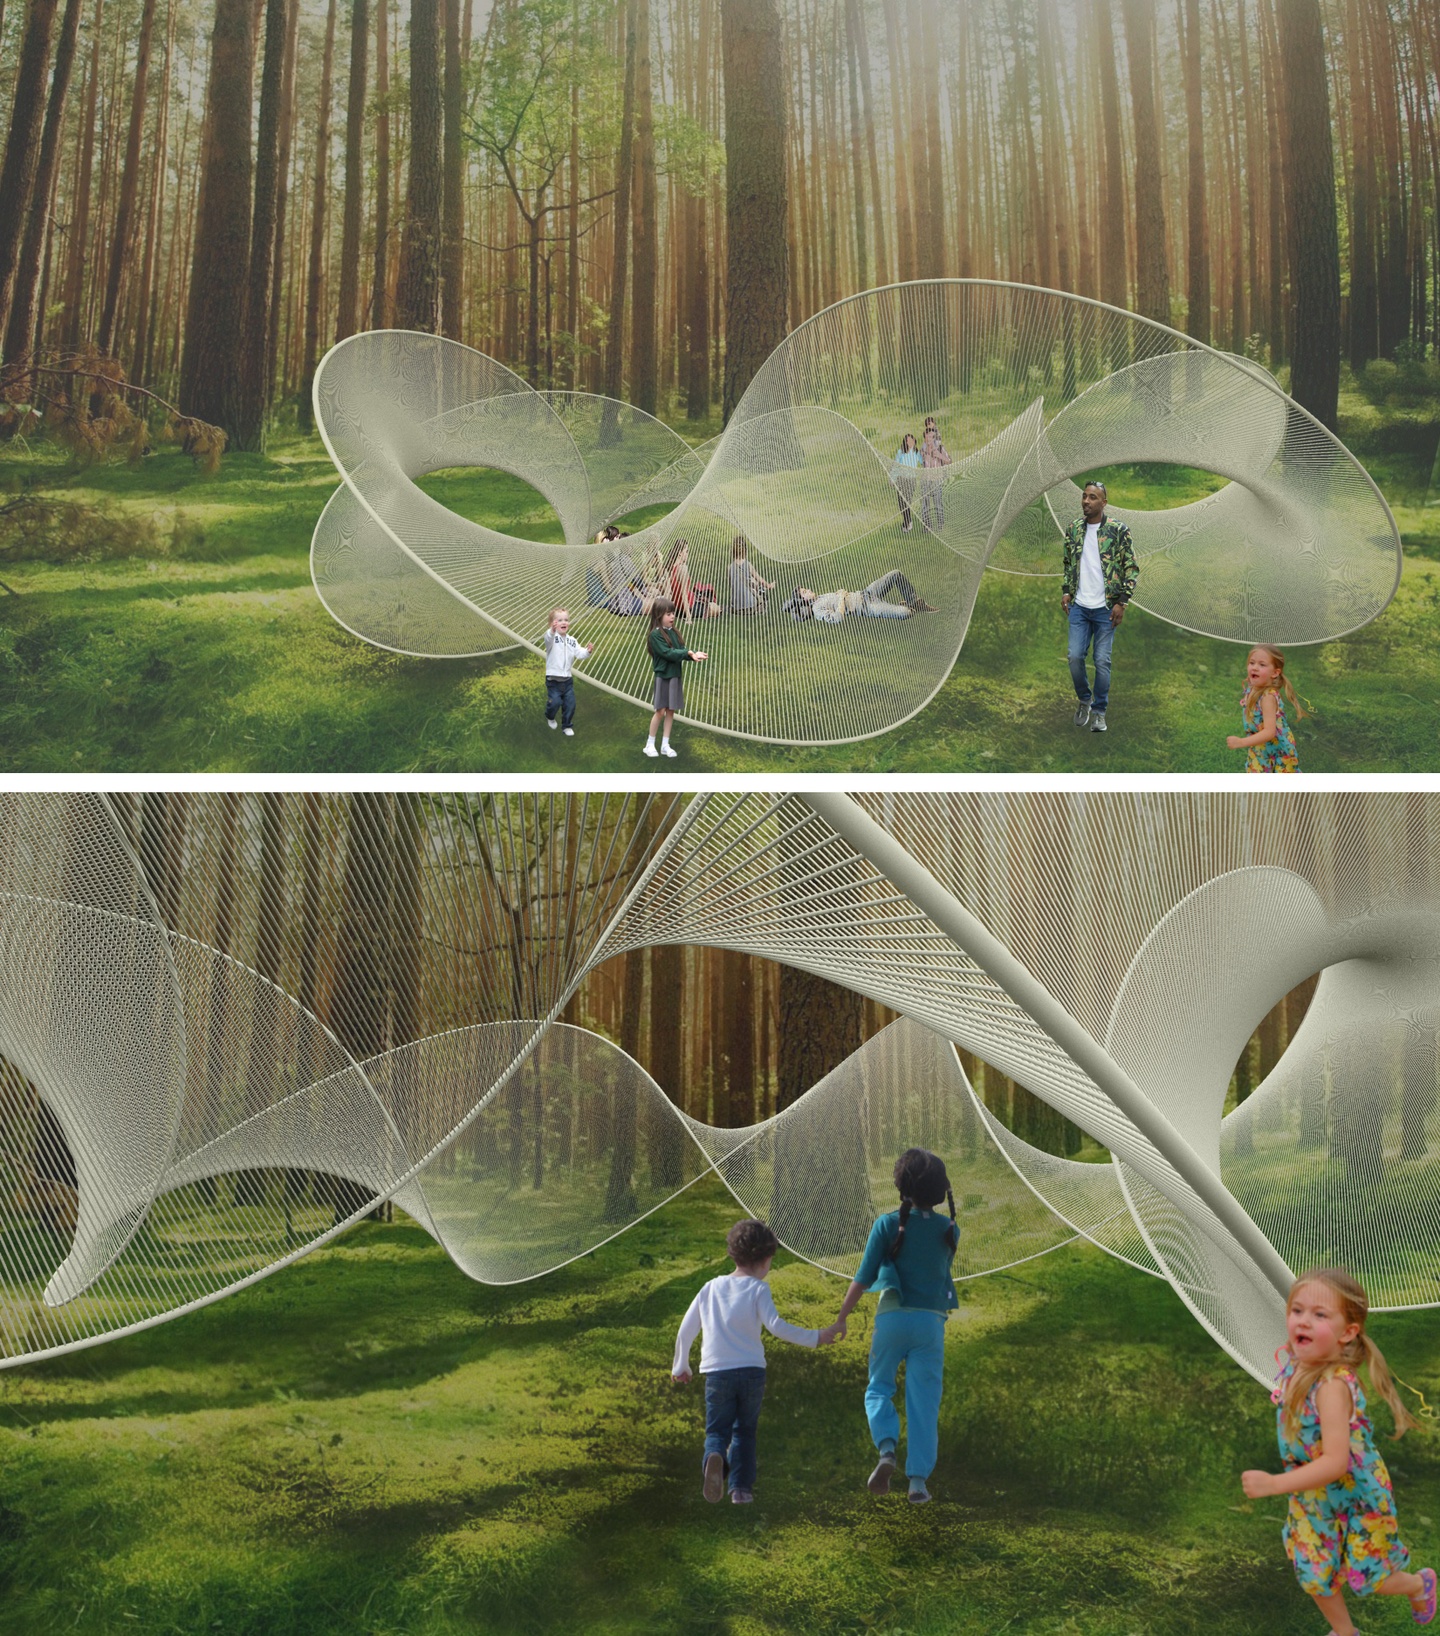 Two renderings of a installation in use